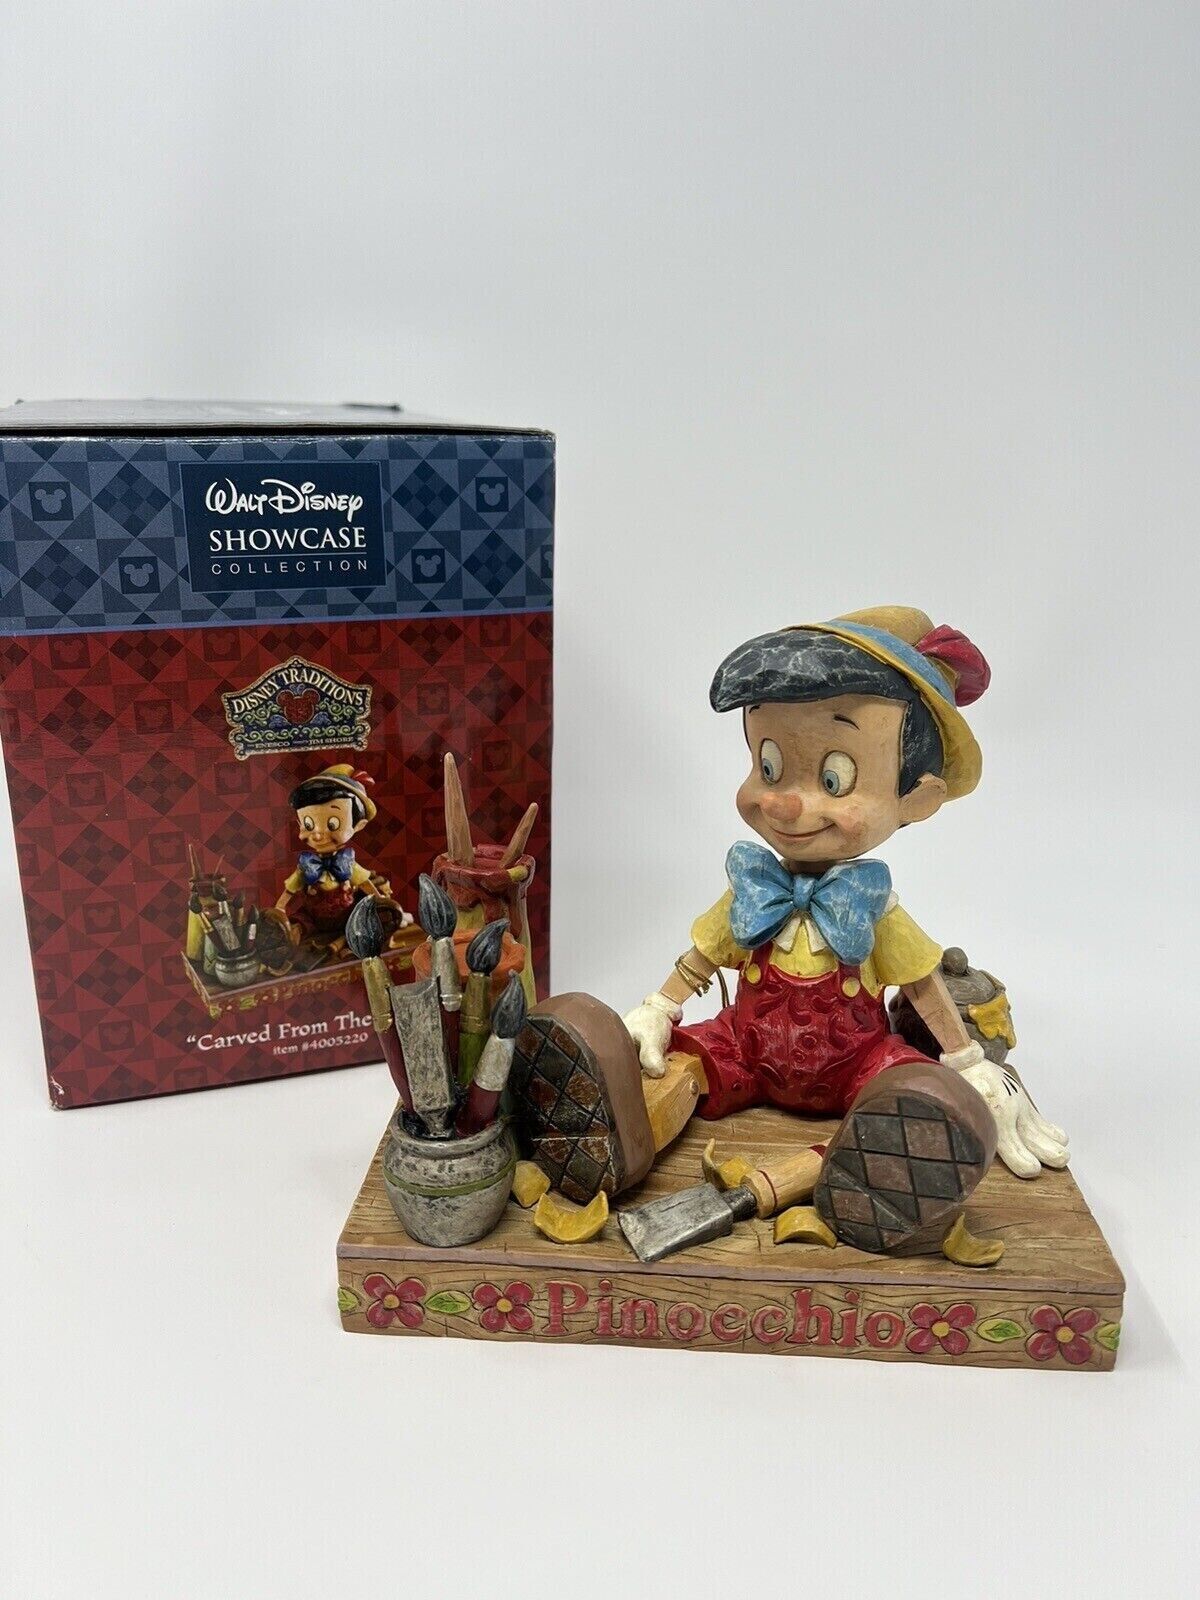 NEW Walt Disney Showcase Collection “Carved From the Heart” Pinocchio Jim Shore